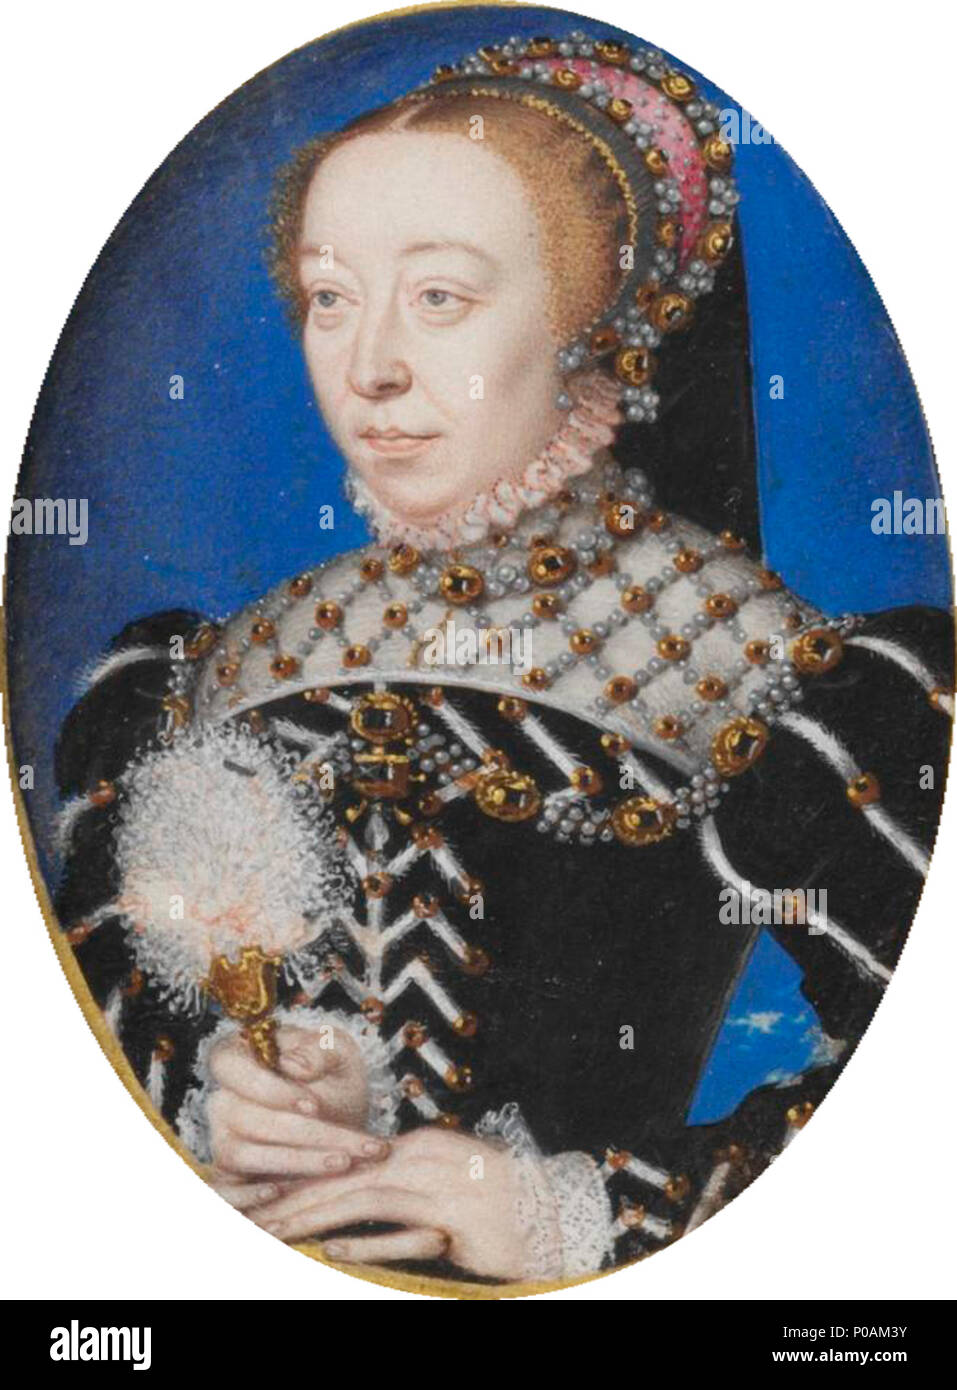 . Miniature of Catherine de' Medici, 'a rare portrait of Catherine before she was widowed in 1559, when she adopted the veil and severely plain dress of a widow.'  . Portrait of Catherine de' Medici (1519-1589) . circa 1555 16 Catherine-de-medici Stock Photo